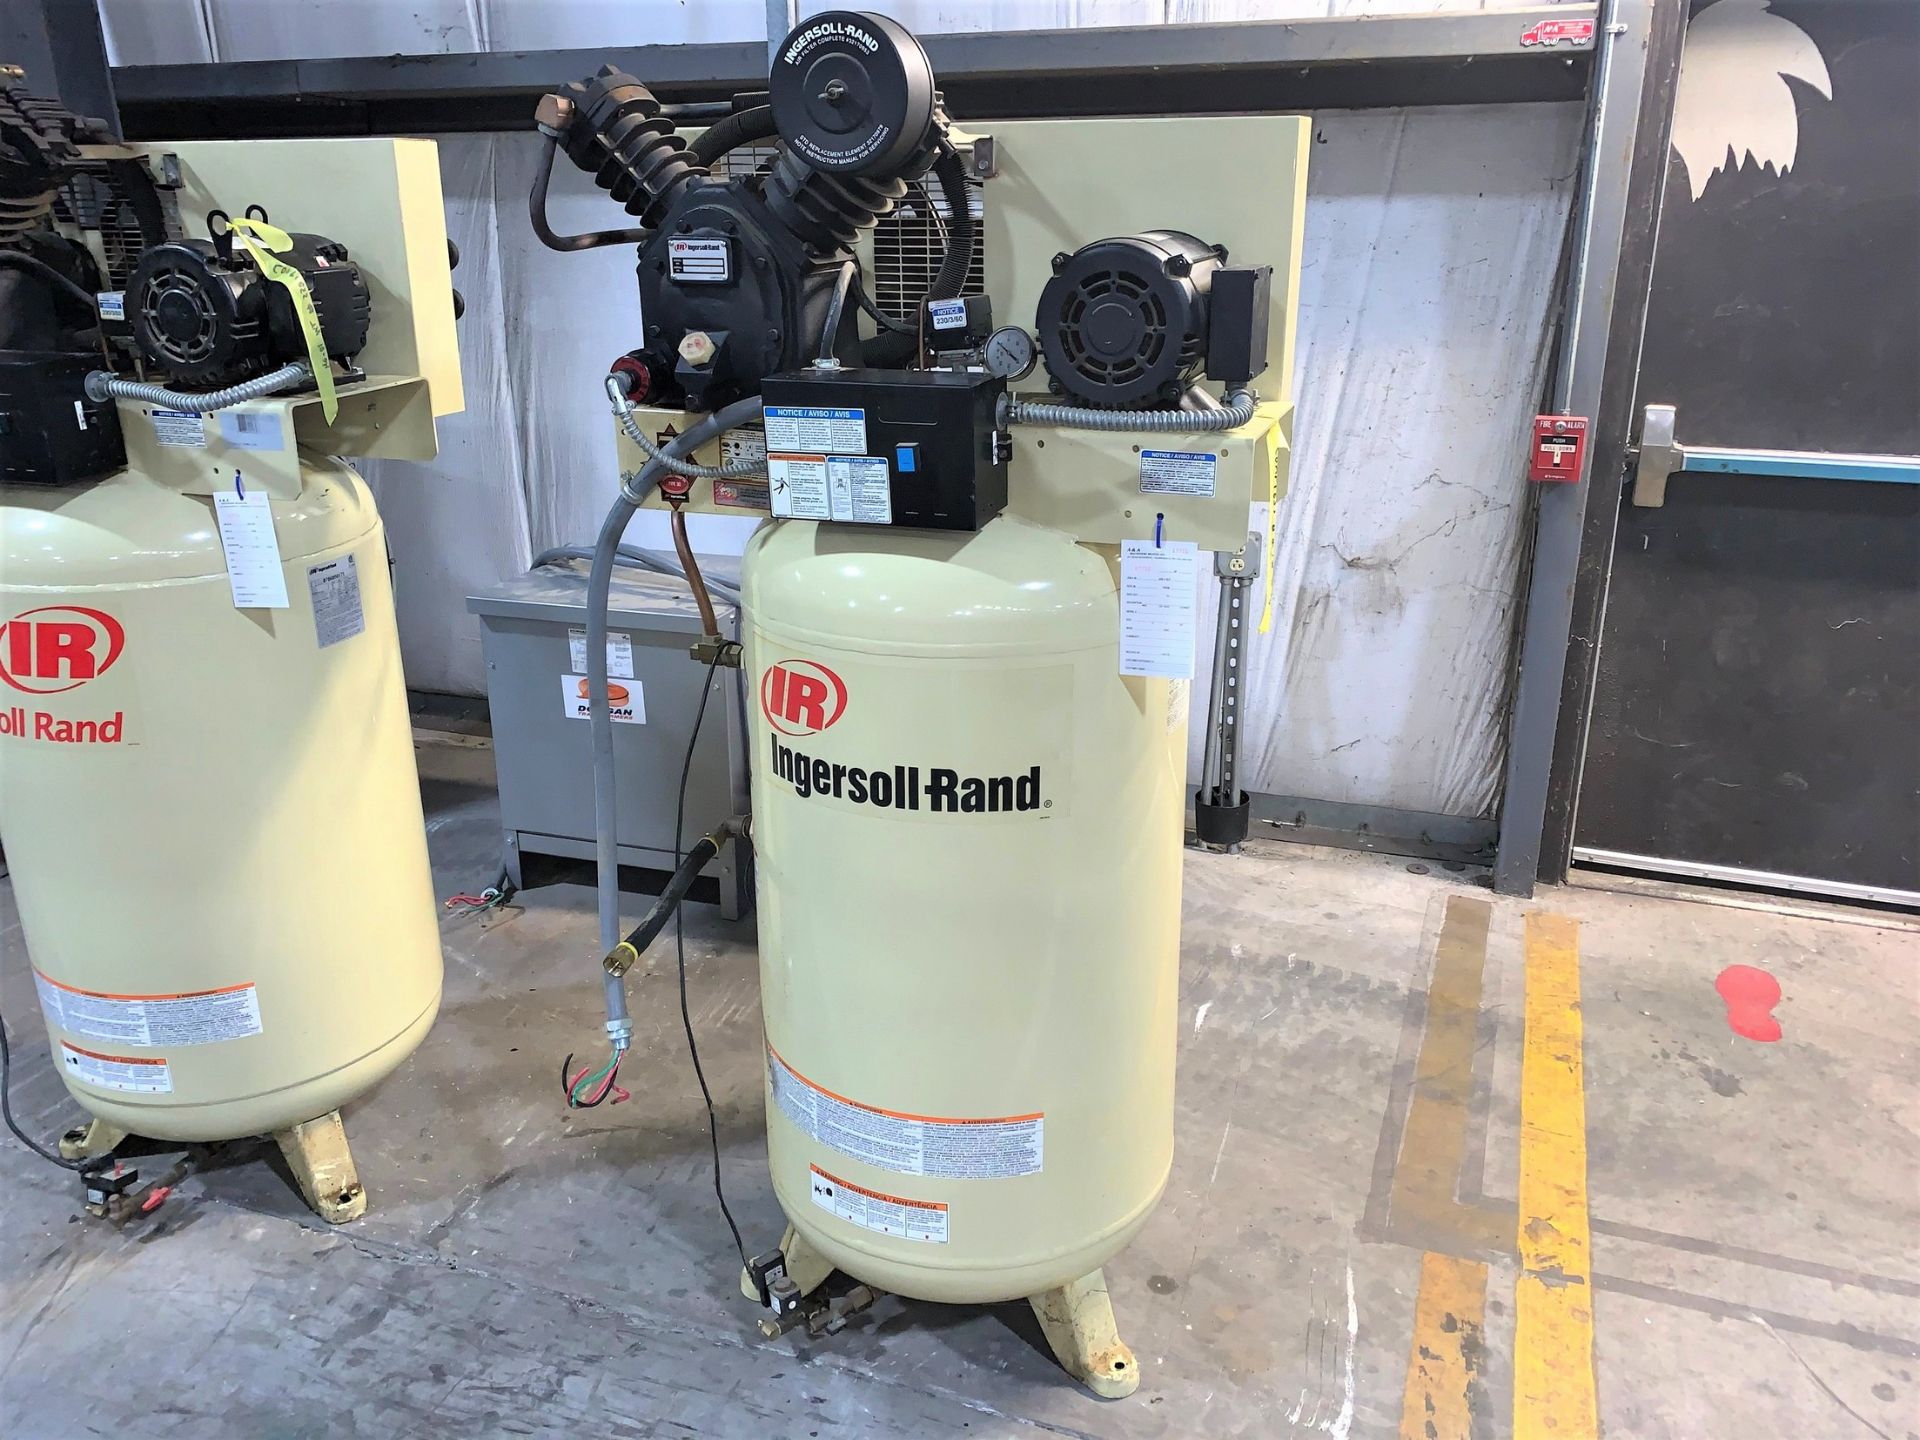 Ingersoll Rand 7.5Hp Reciprocating 2-Stage Air Compressor